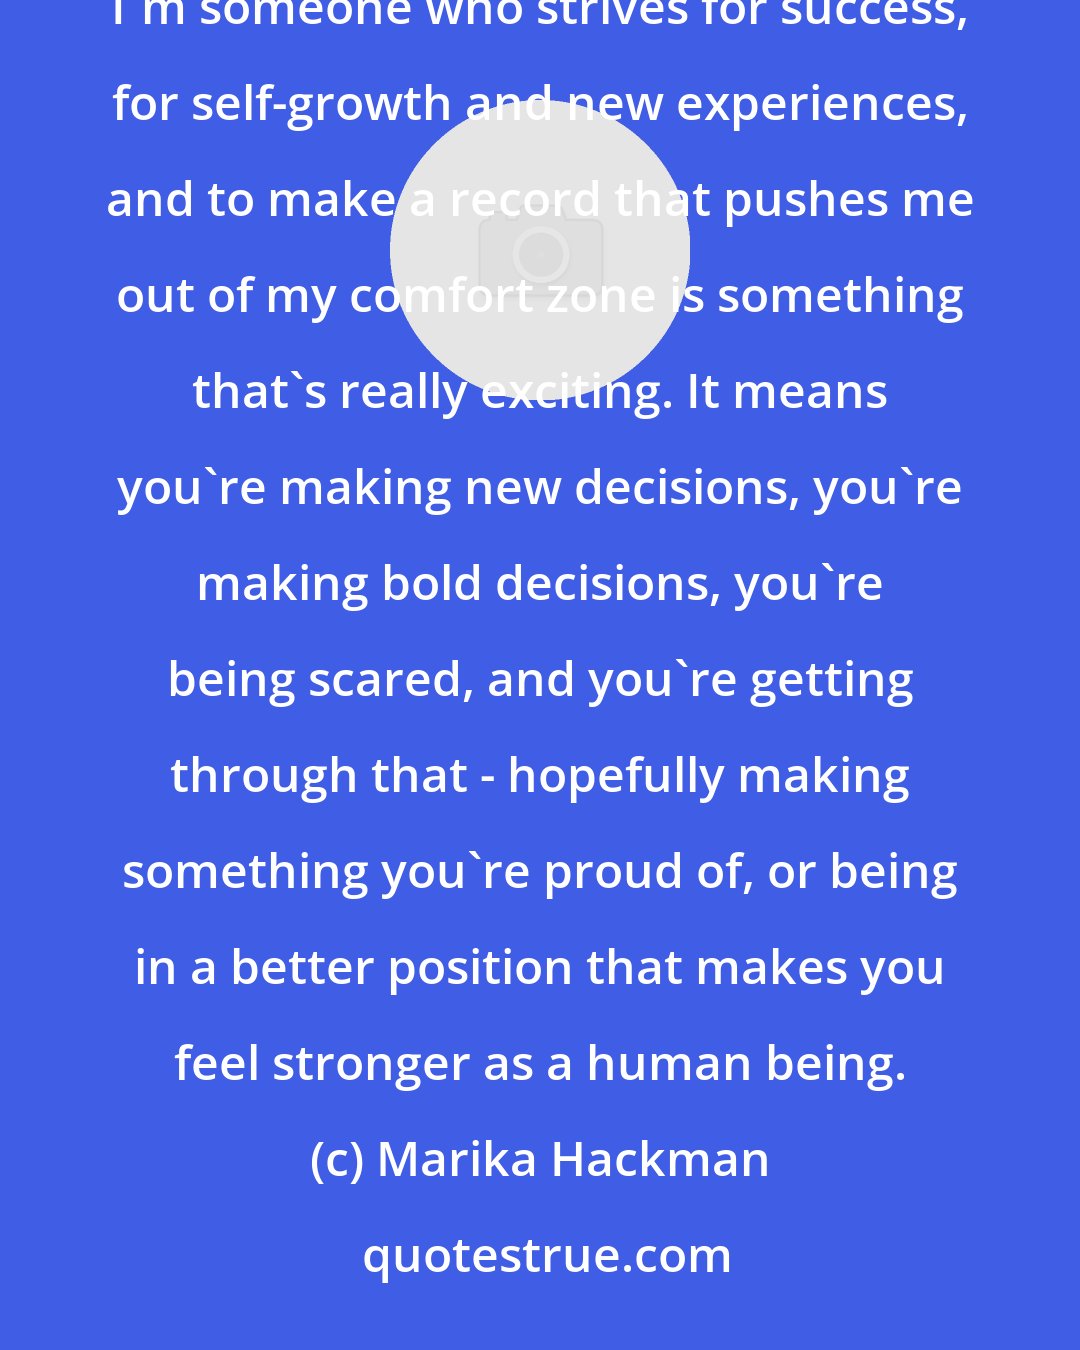 Marika Hackman: If you're stuck in a rut doing the same thing over and over again, what are you actually, really achieving? I'm someone who strives for success, for self-growth and new experiences, and to make a record that pushes me out of my comfort zone is something that's really exciting. It means you're making new decisions, you're making bold decisions, you're being scared, and you're getting through that - hopefully making something you're proud of, or being in a better position that makes you feel stronger as a human being.